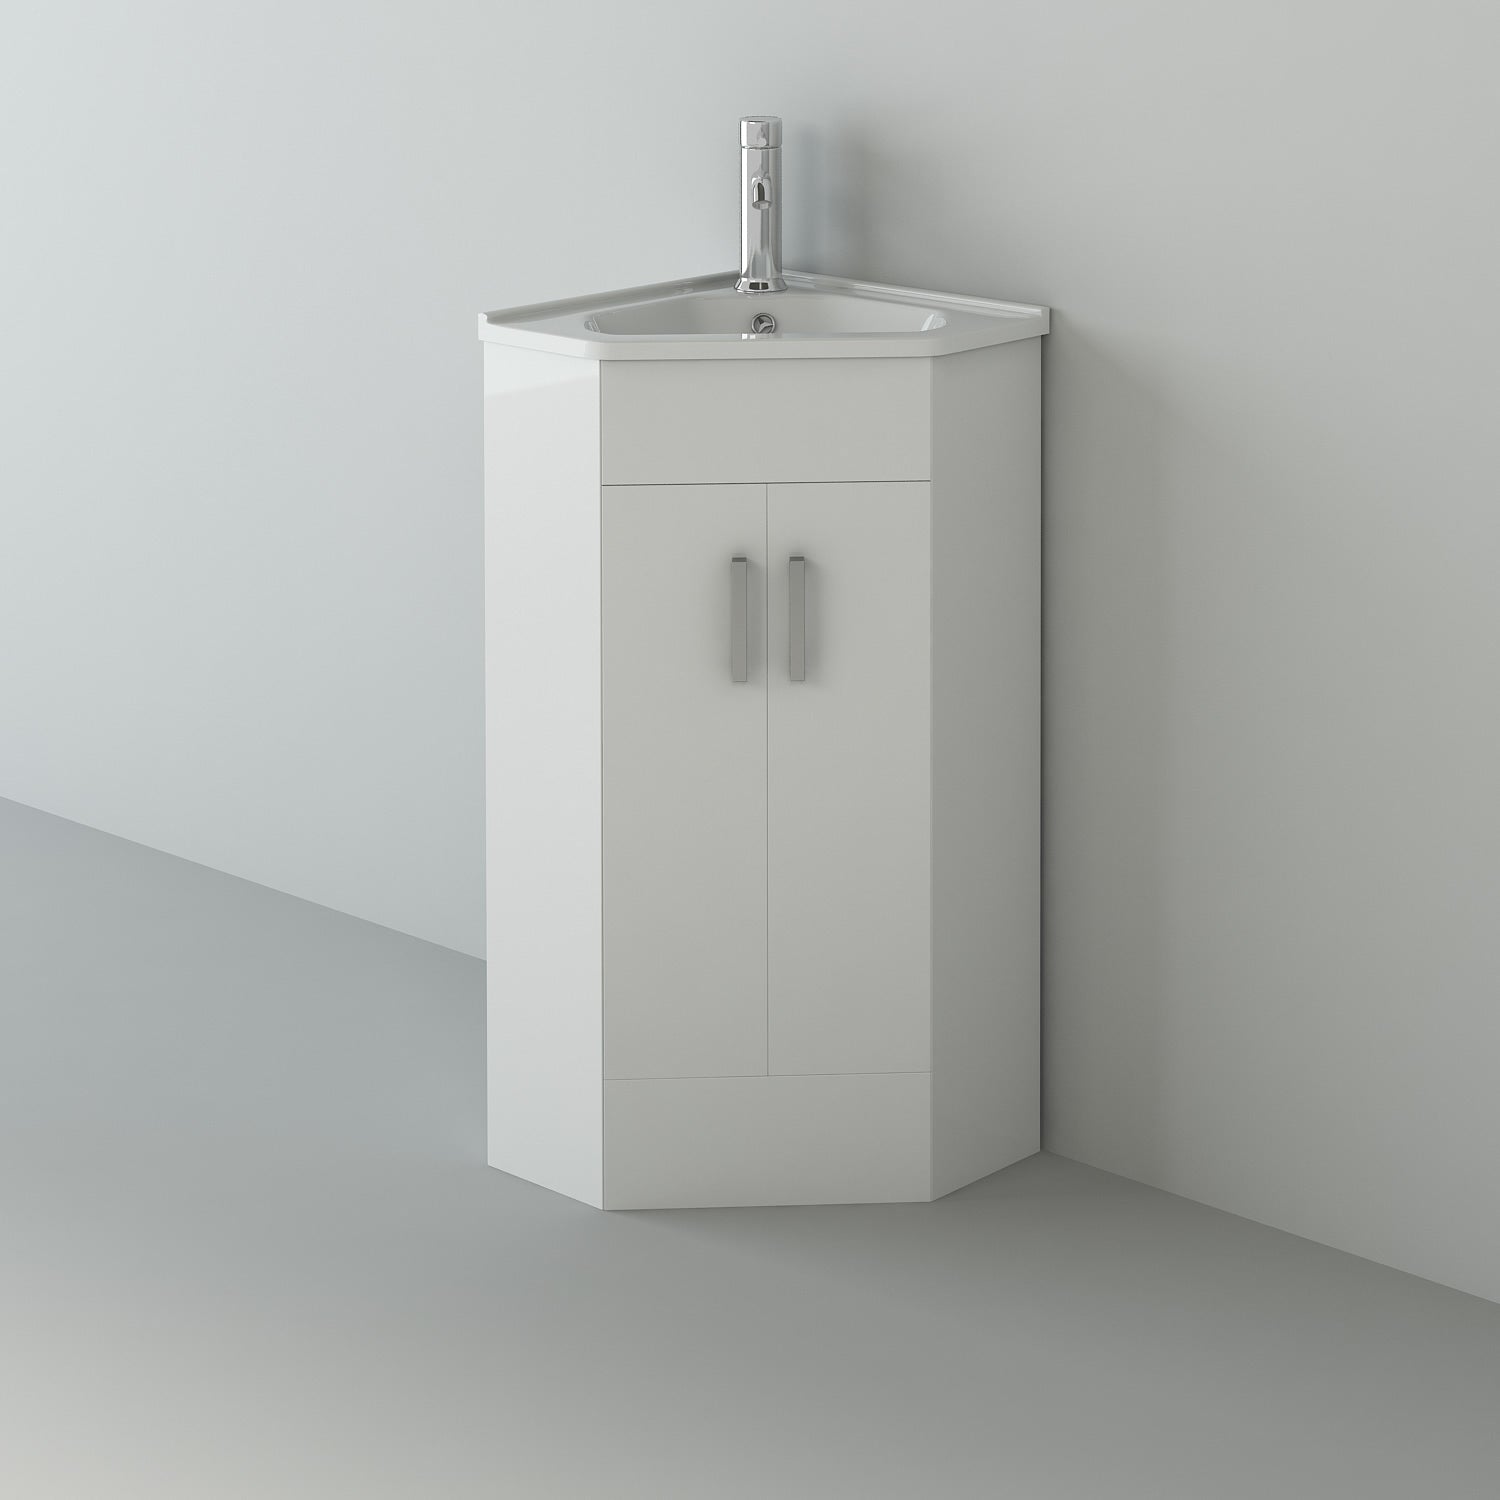 Krona Corner Cloakroom Vanity Unit and basin - 400mm Wide in stylish white finish, space-saving design for UK bathrooms.